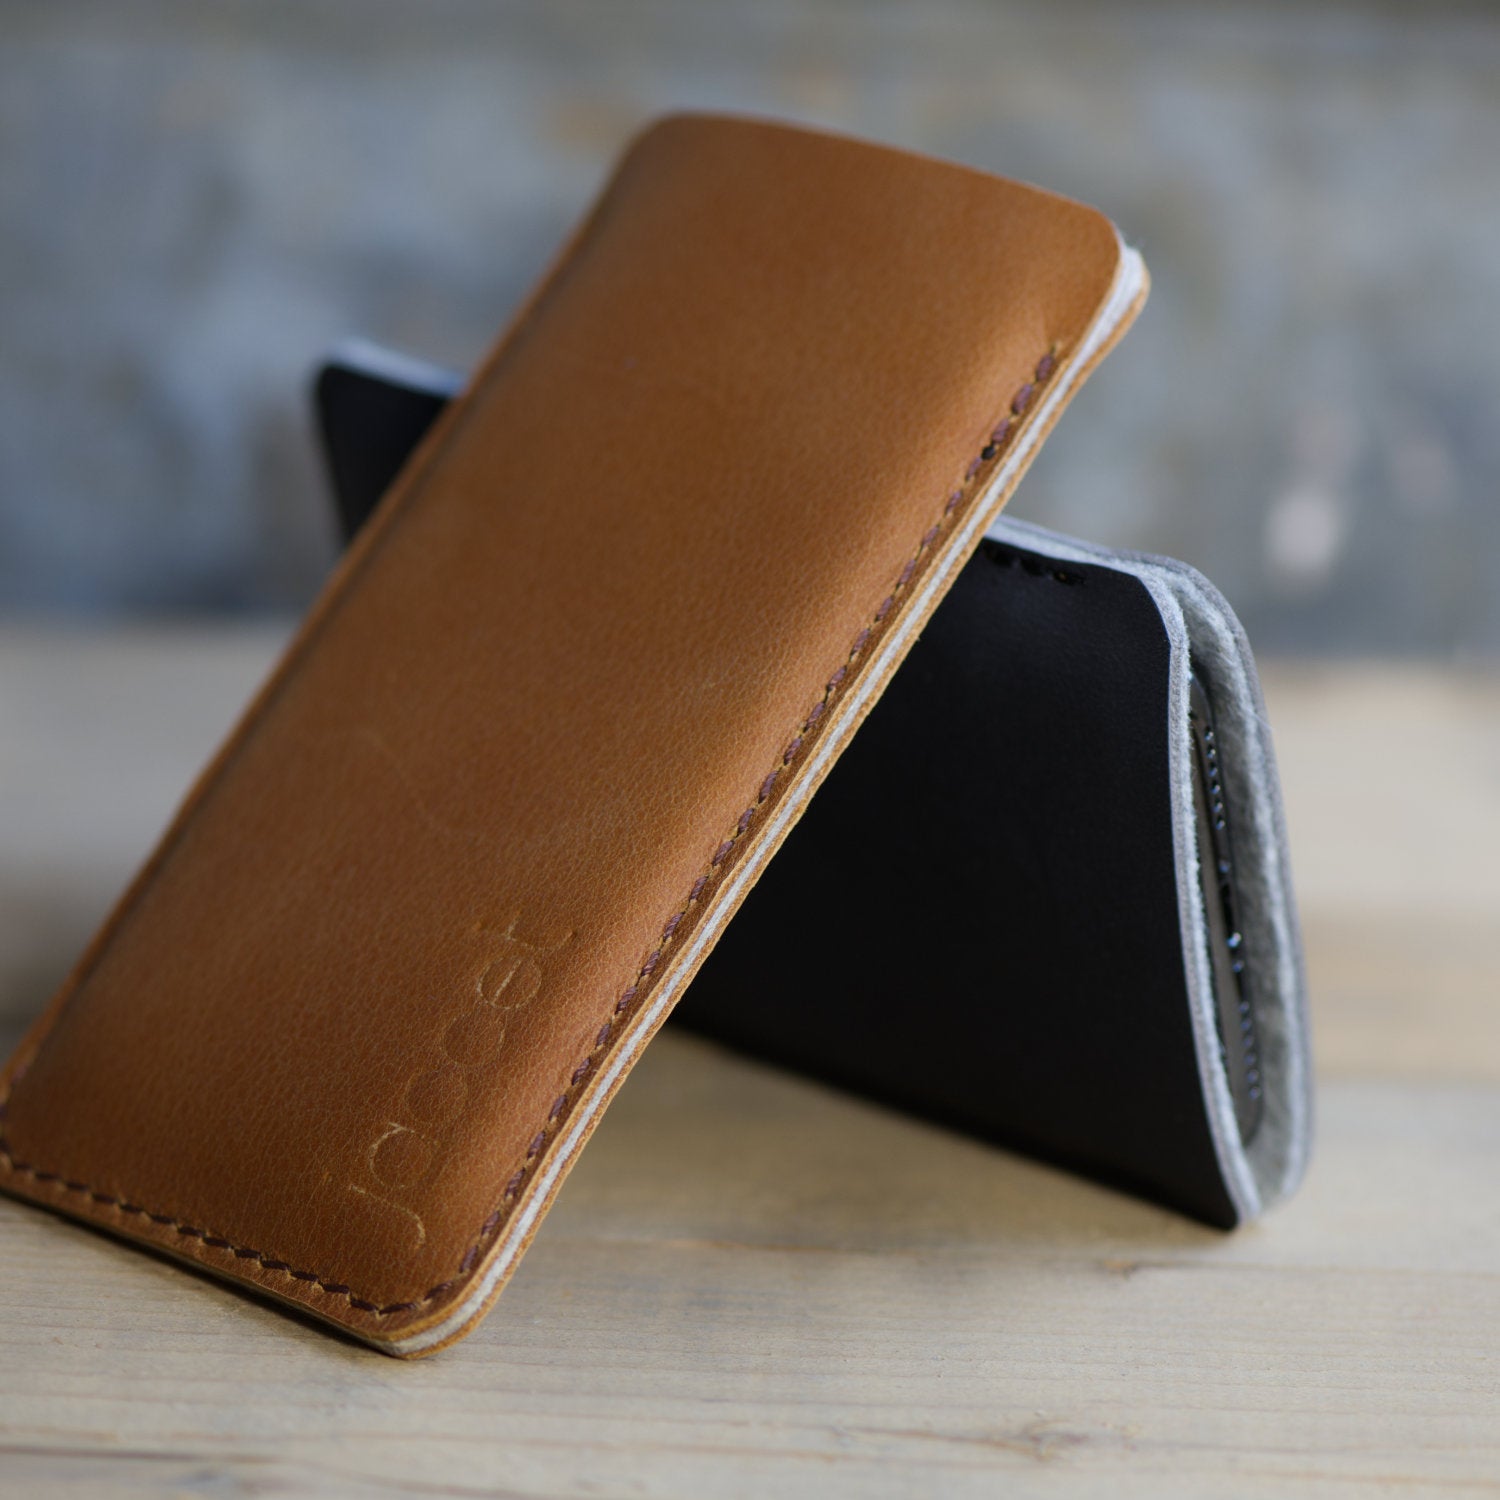 JACCET leather Xiaomi sleeve - Cognac color leather with brown wool felt - 100% Handmade